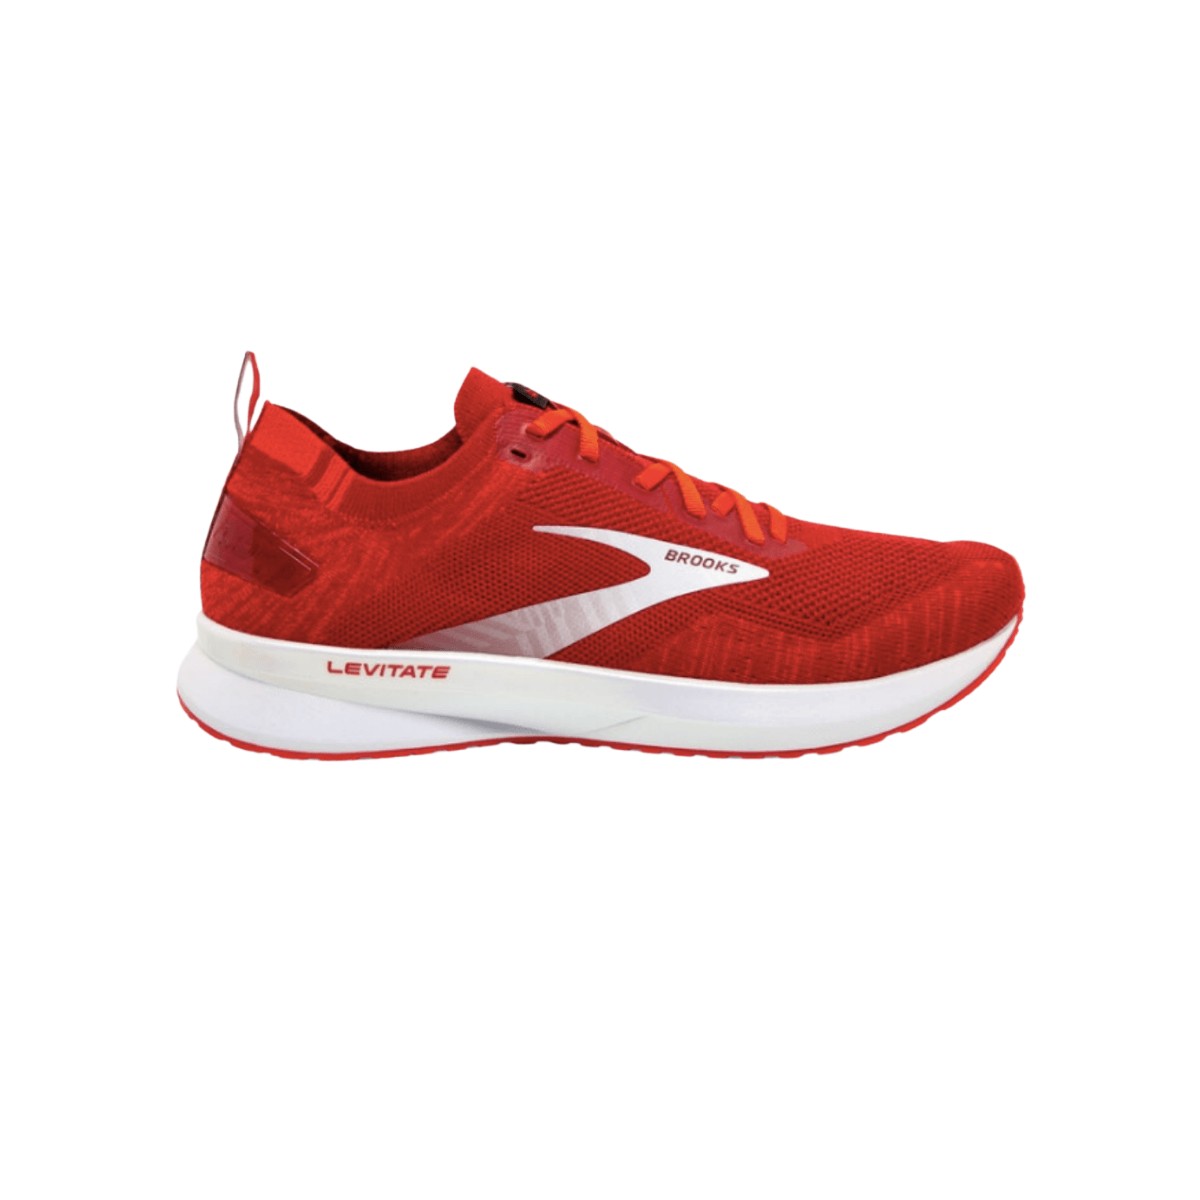 Brooks Levitate 4 Shoes Red White AW20, Size 40,5 - EUR